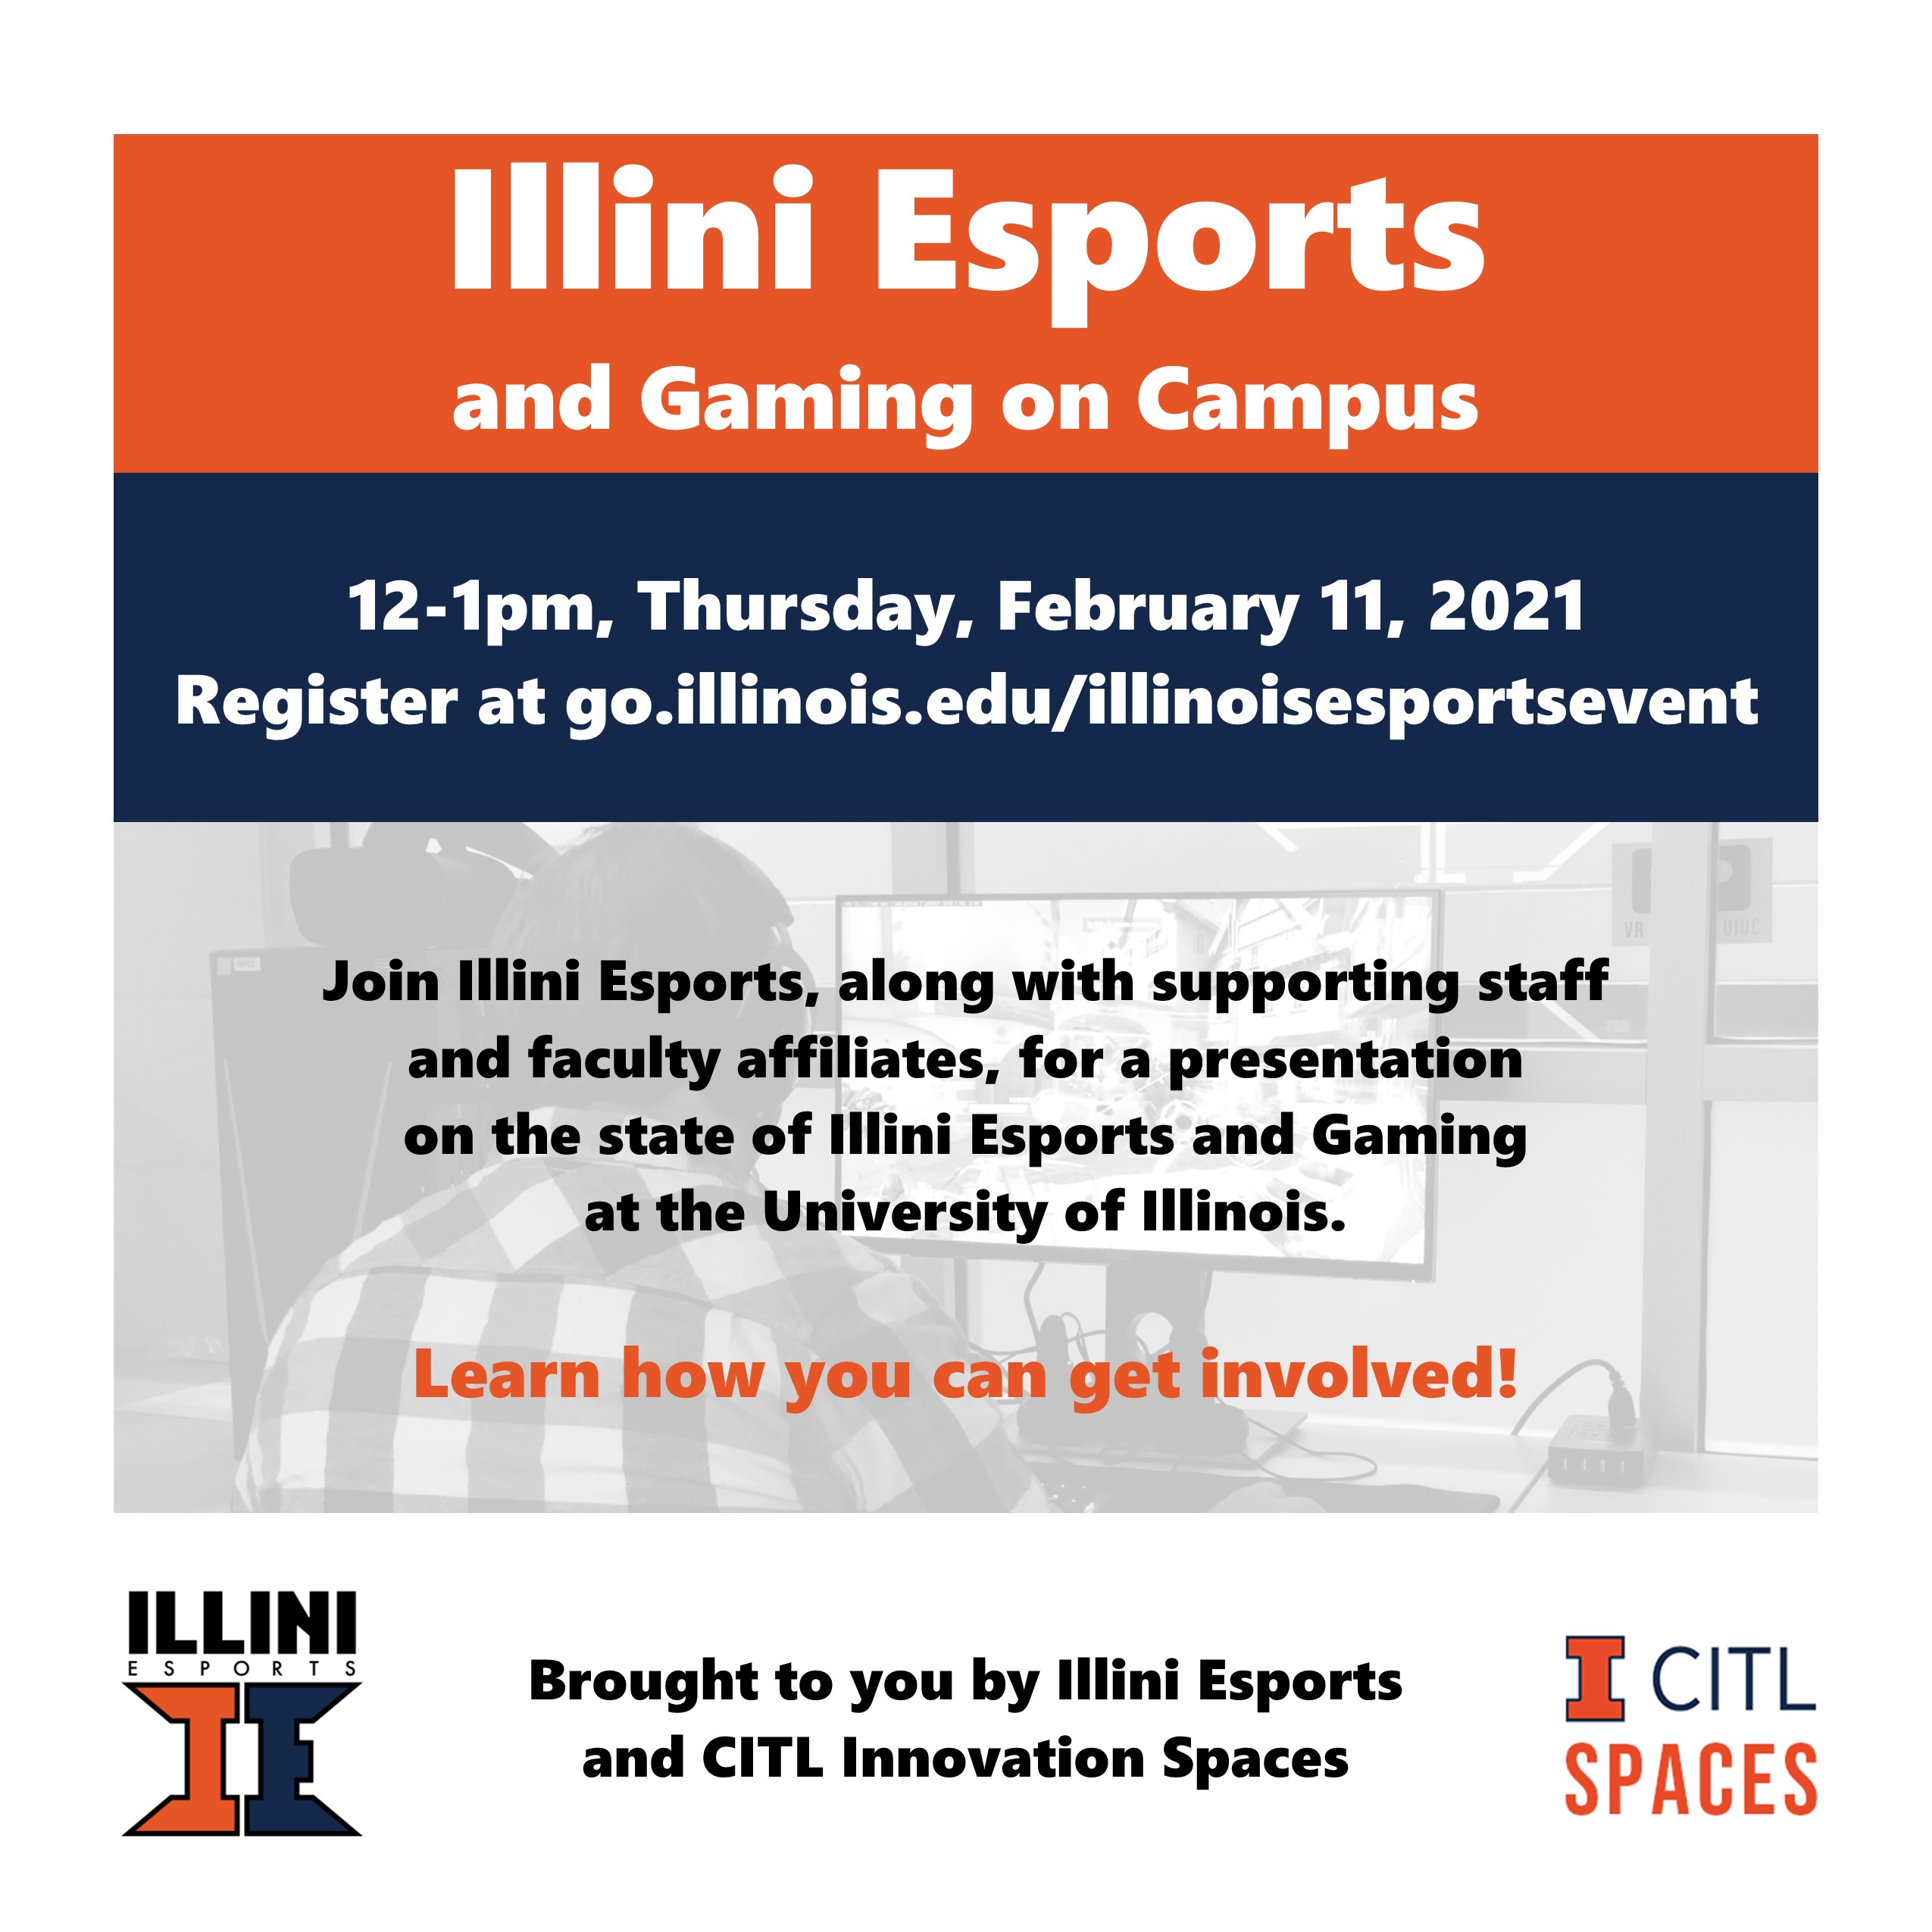 Illini Esports and Gaming on Campus